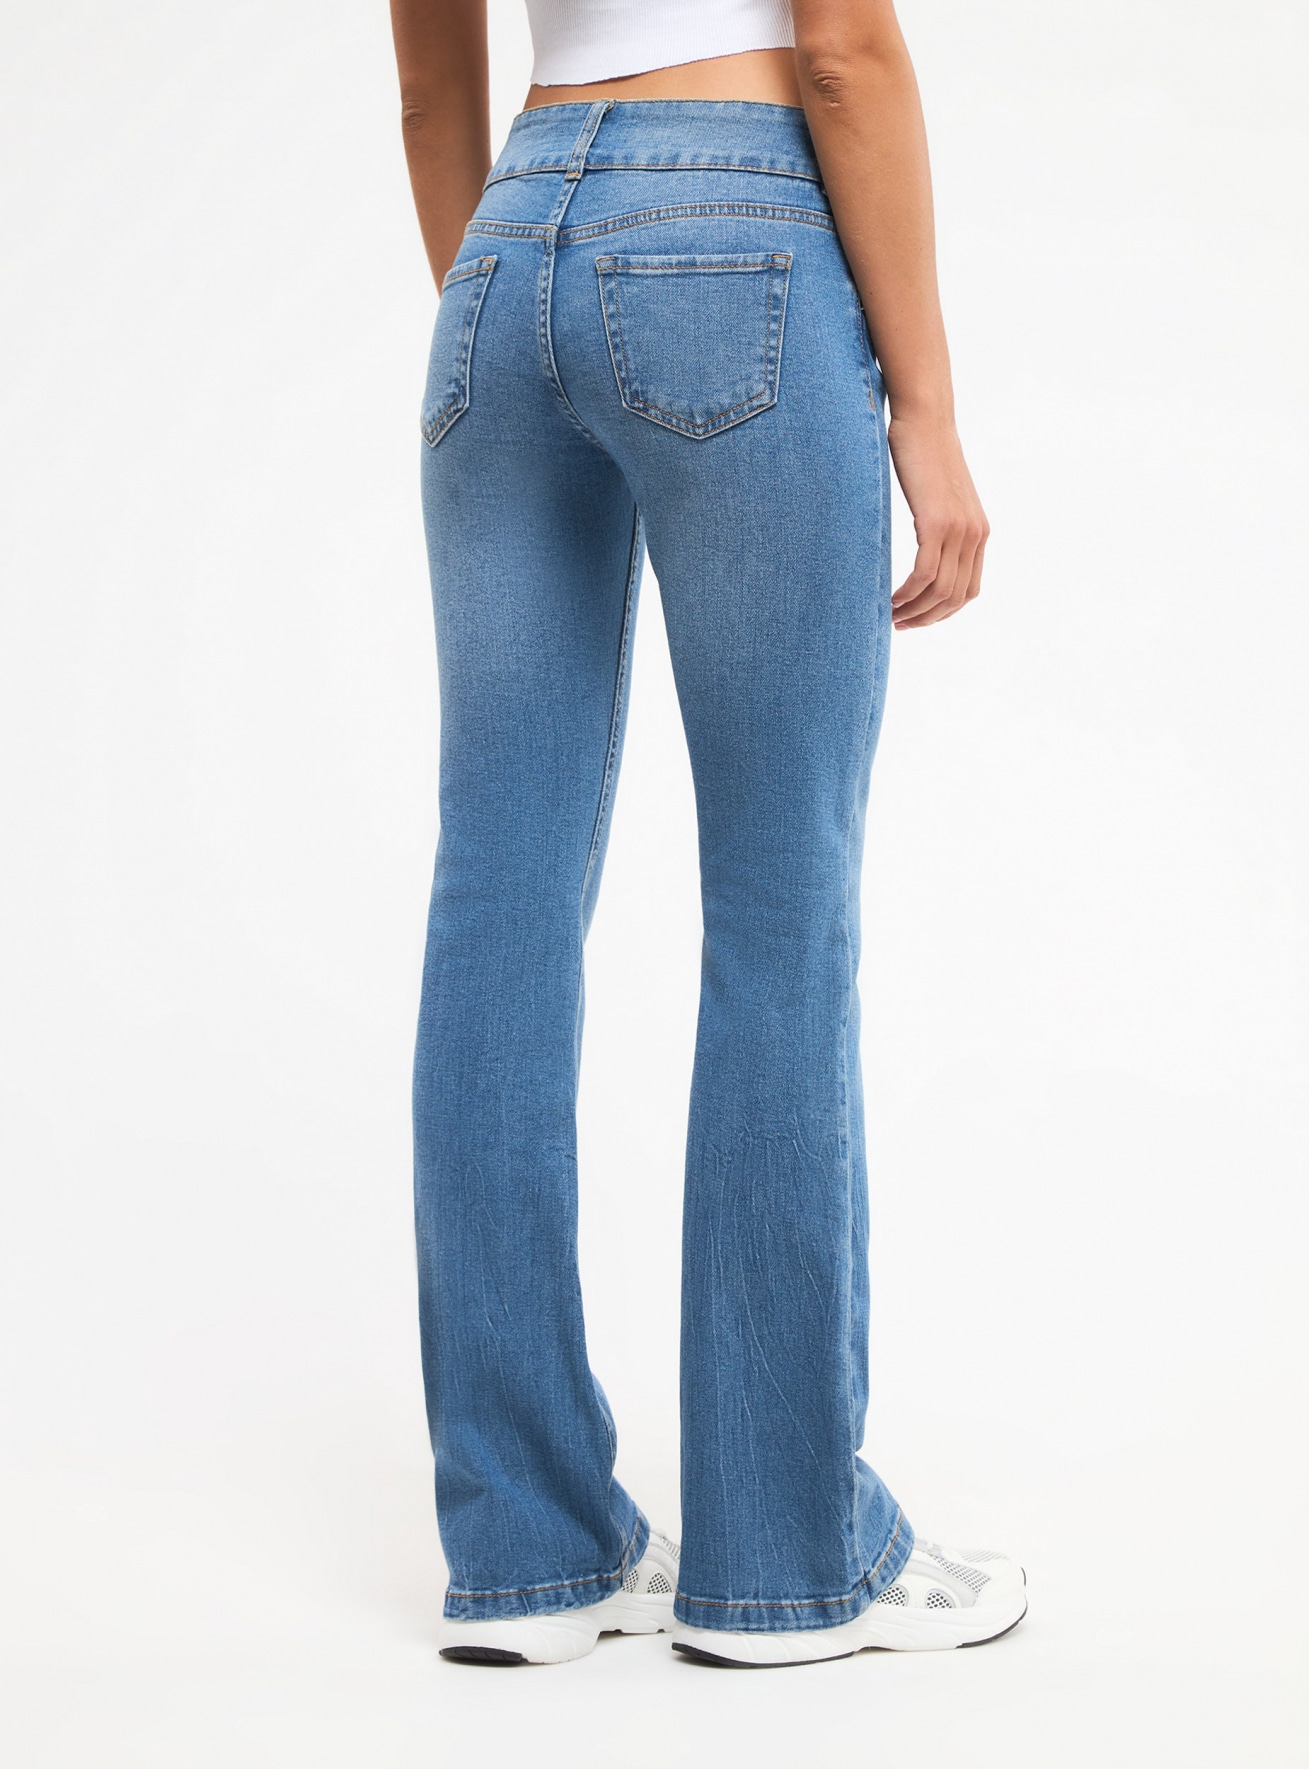 Flare Sexy Denim Light Blue Jeans Women With Artificial Pearl Beading For  Women Full Length, High Waist, Stretchy Lady Stretch Pants From Changkuku,  $20.1 | DHgate.Com